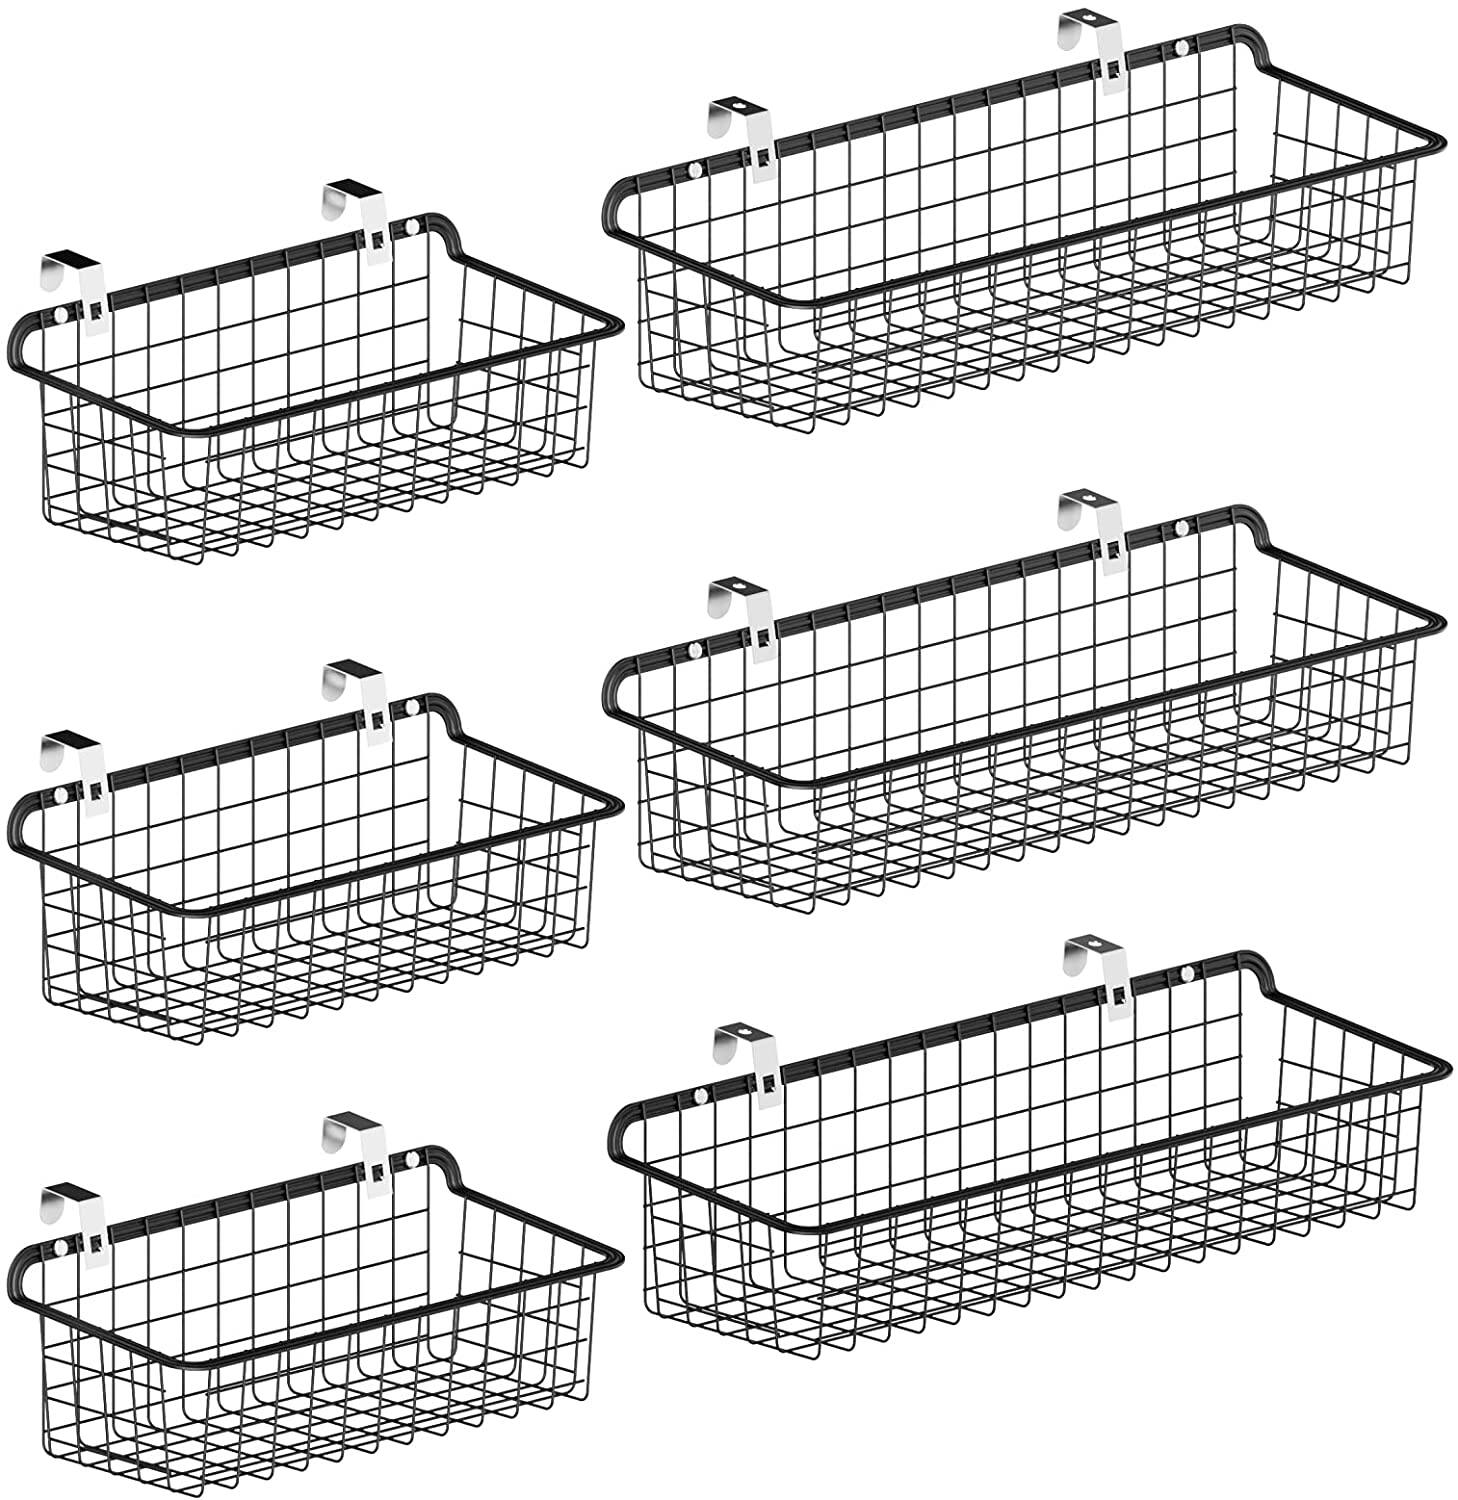 Cambond 6 Pack Wall Baskets $16.99, 3 Large and 3 Small